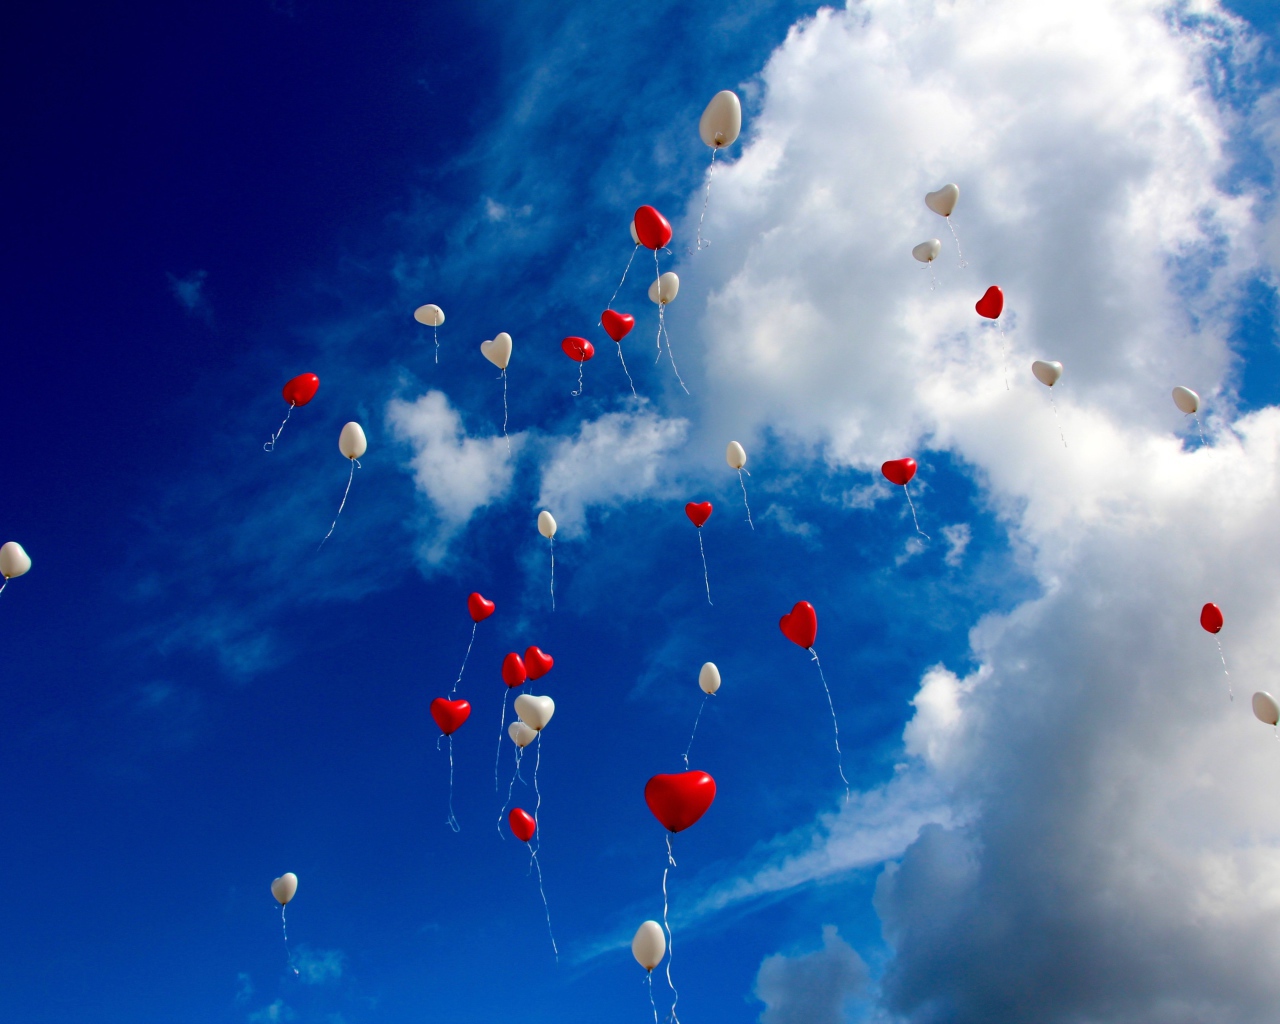 Many heart shaped balloons in the sky with white clouds